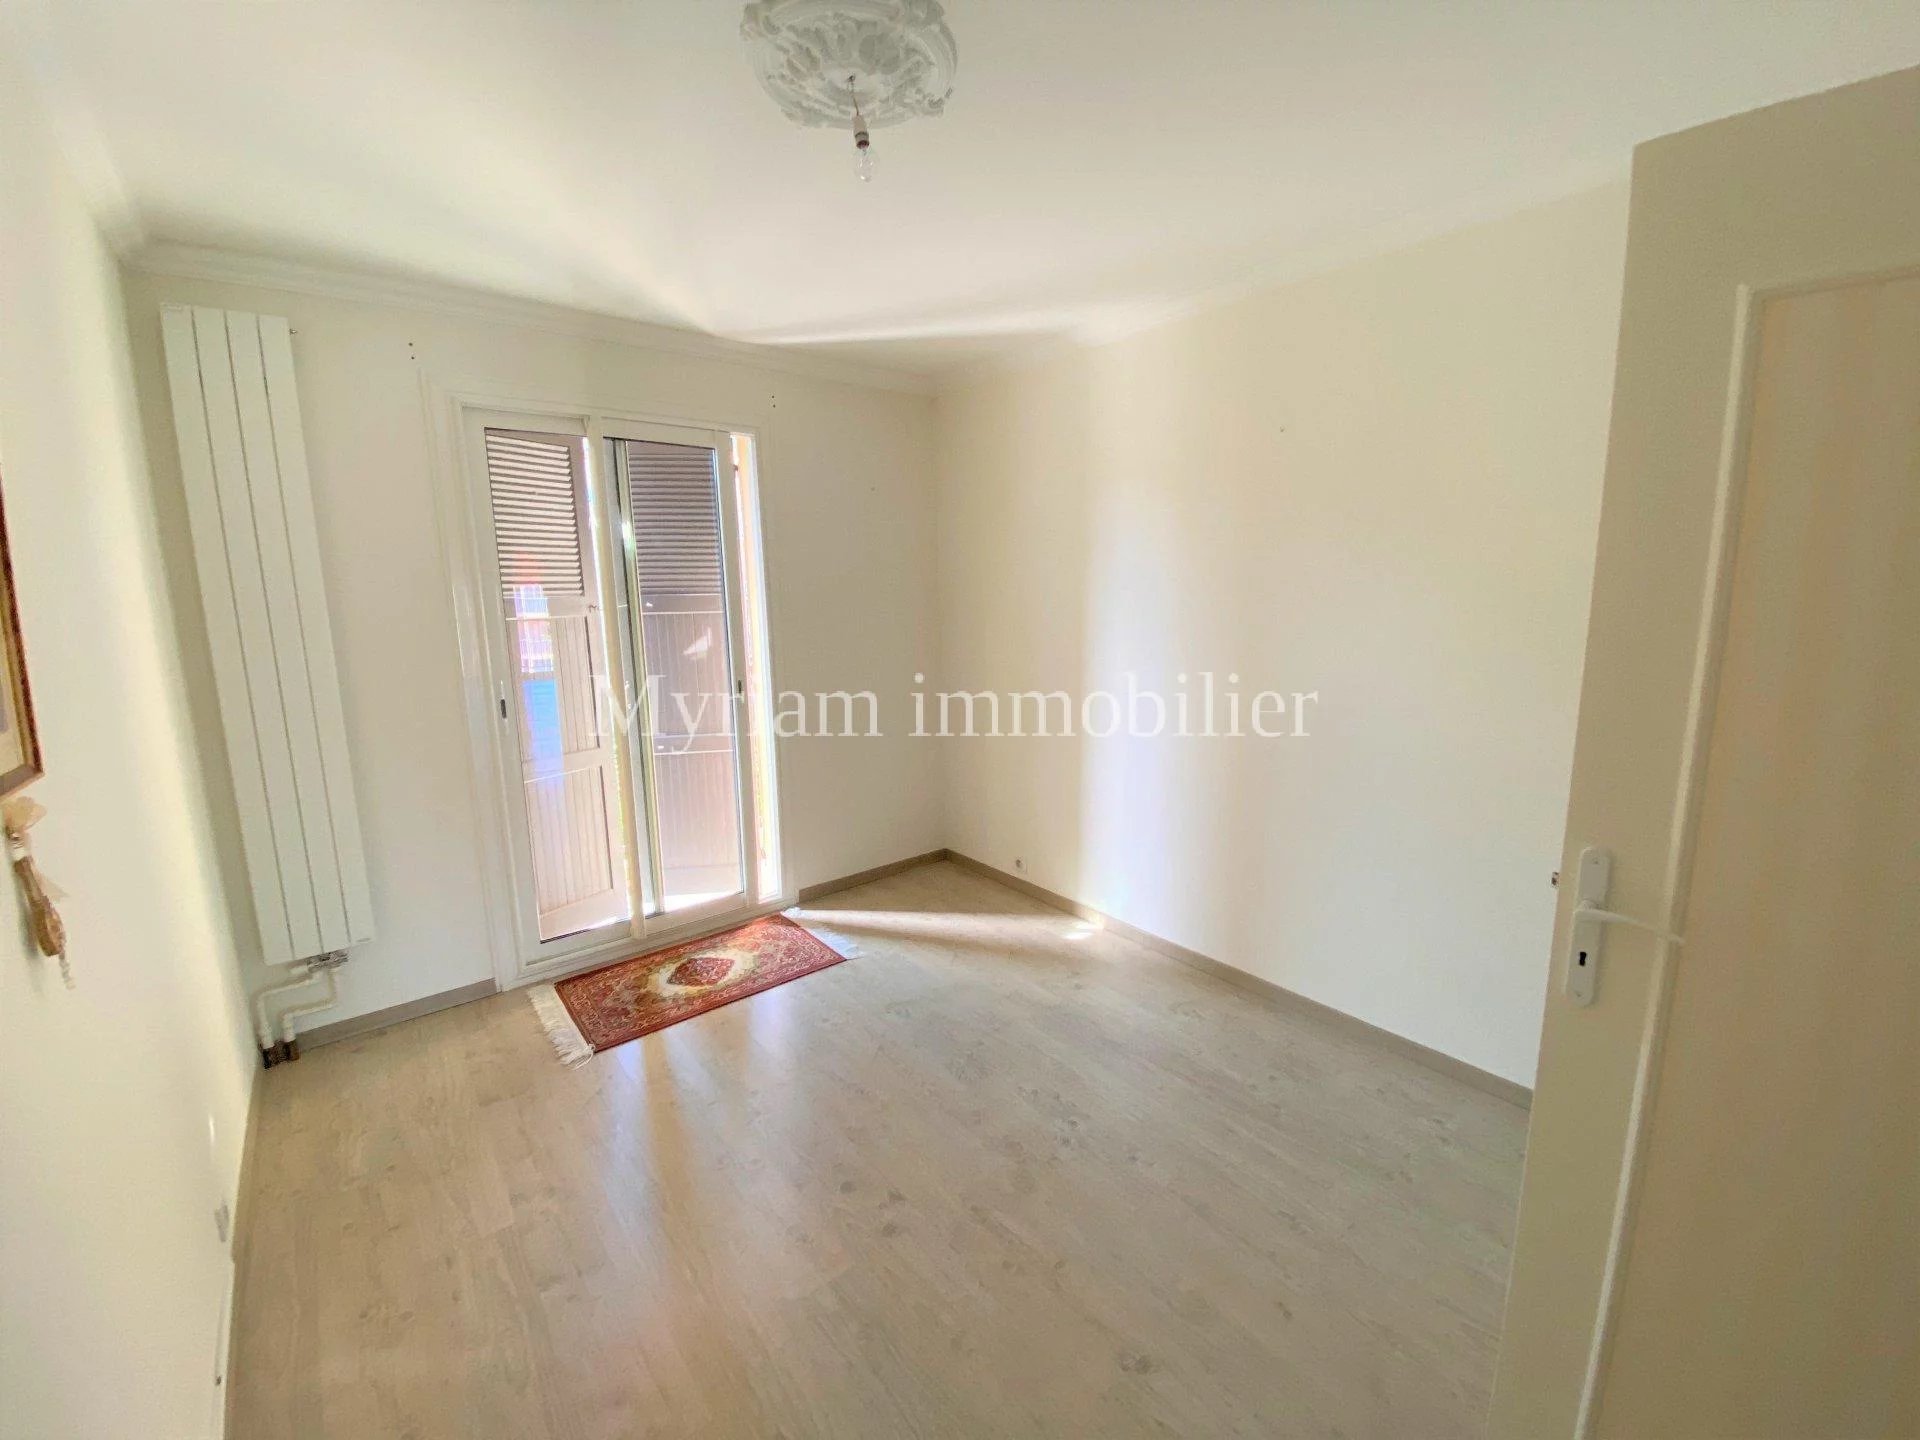 3 room apartment SOLD RENTED, Dominant view in PEYMEINADE